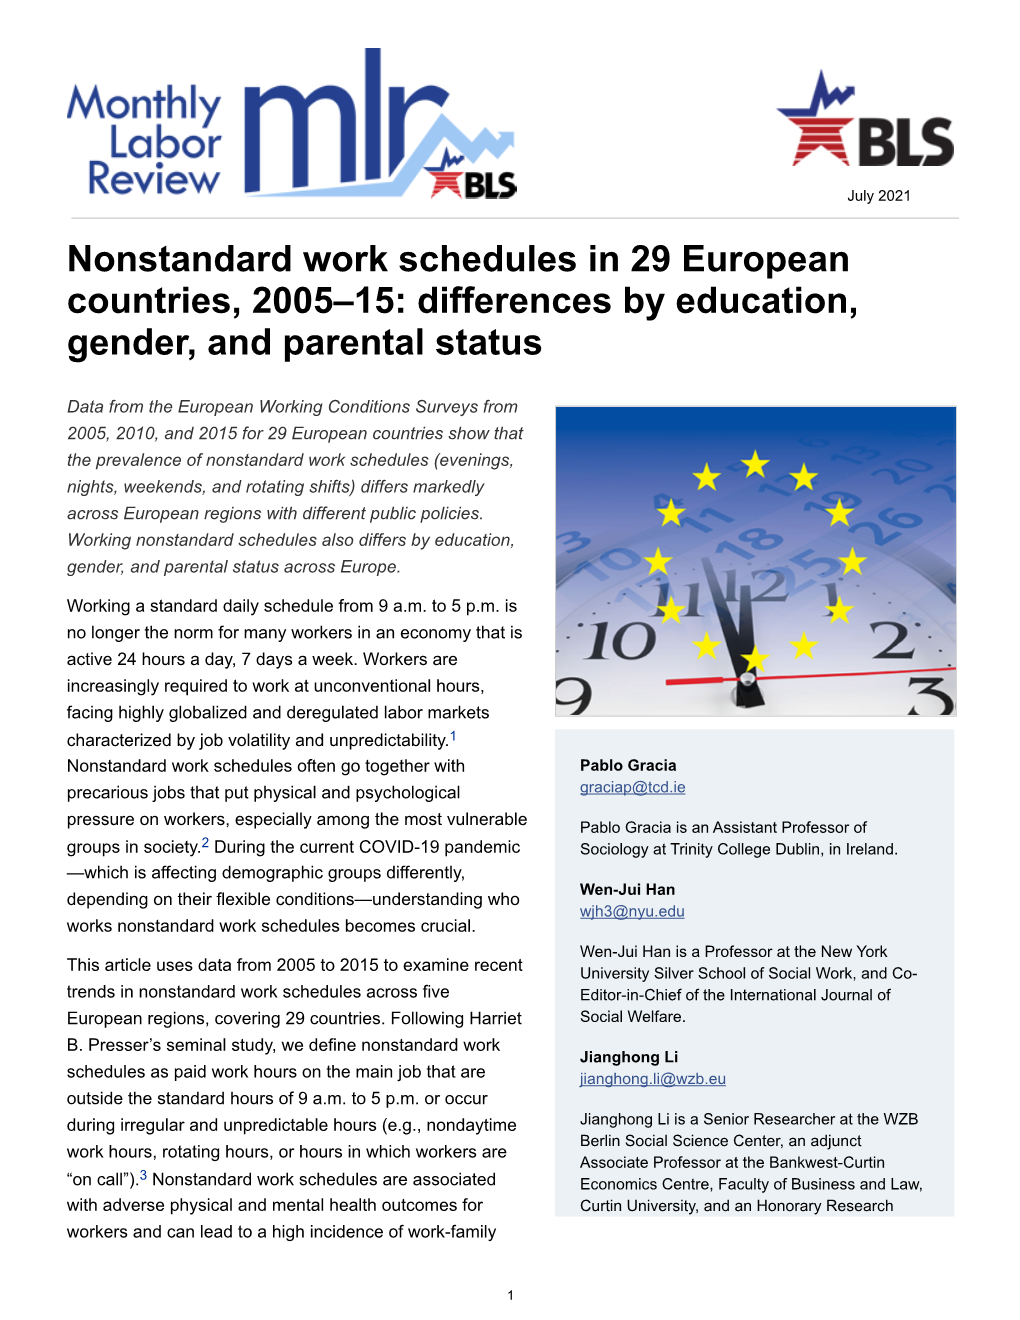 Nonstandard Work Schedules in 29 European Countries, 2005–15: Differences by Education, Gender, and Parental Status